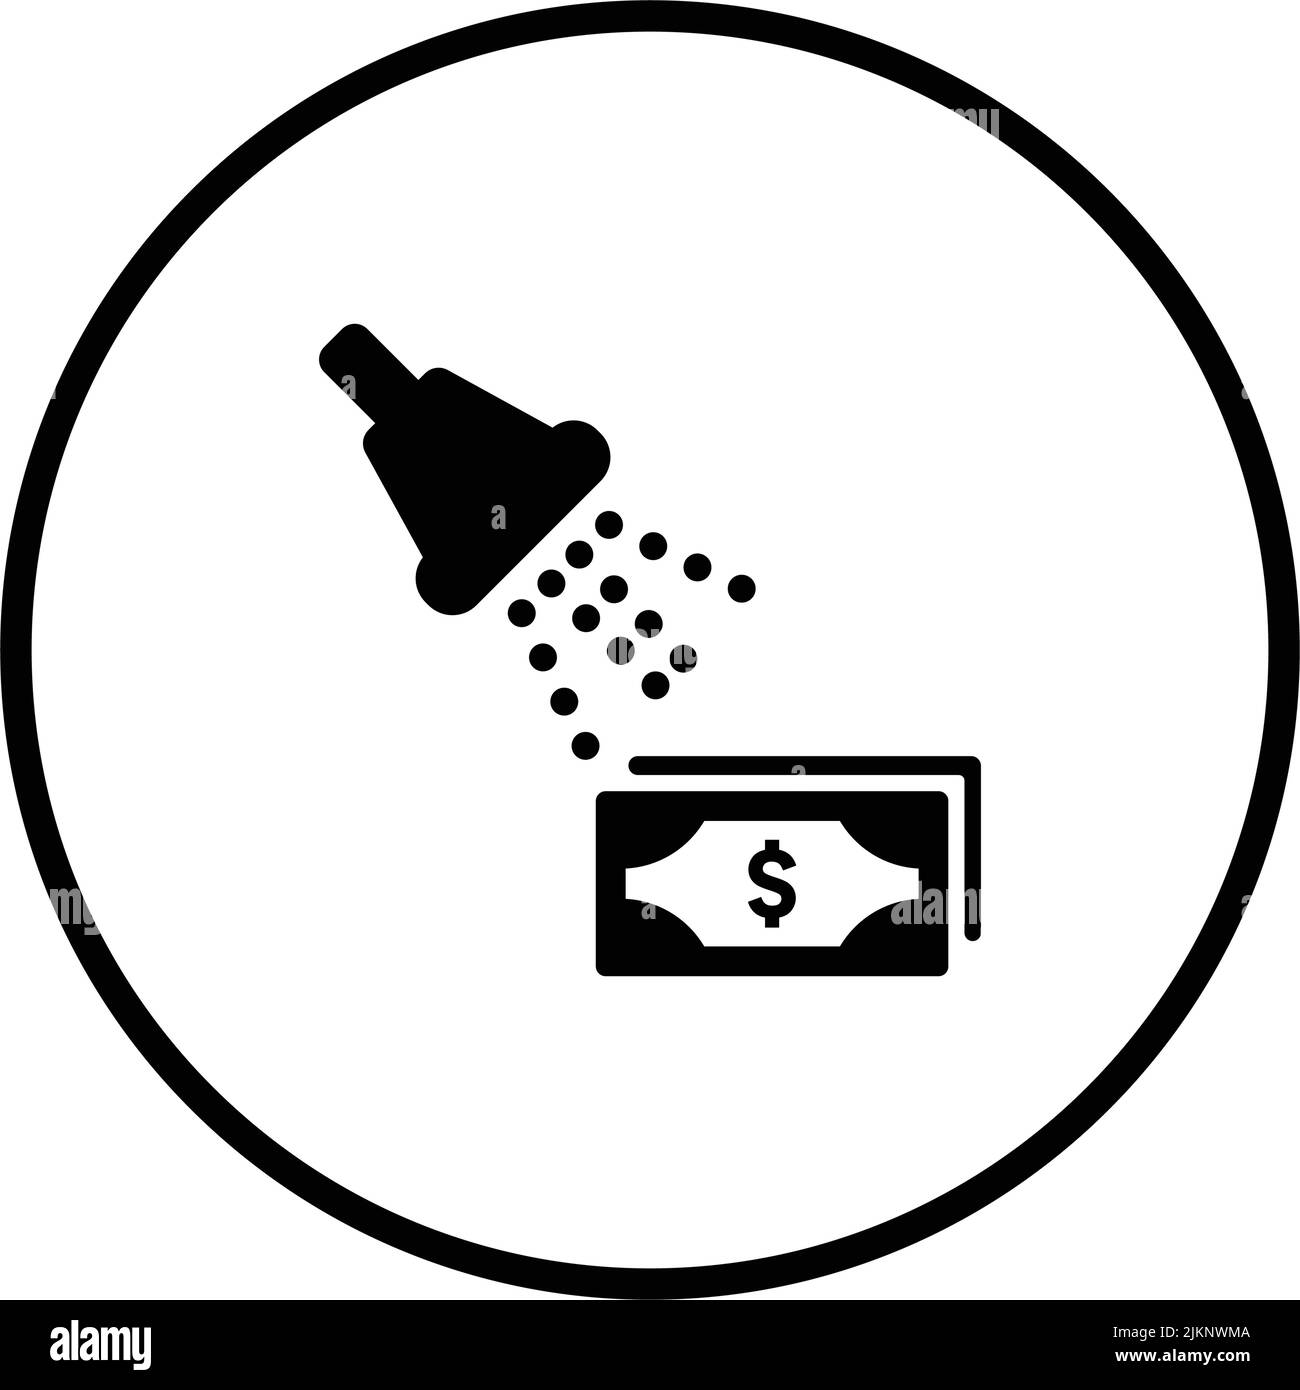 Dirty money, clear, wash, banknotes icon - Perfect use for designing and developing websites, printed files and presentations, Promotional Materials a Stock Vector